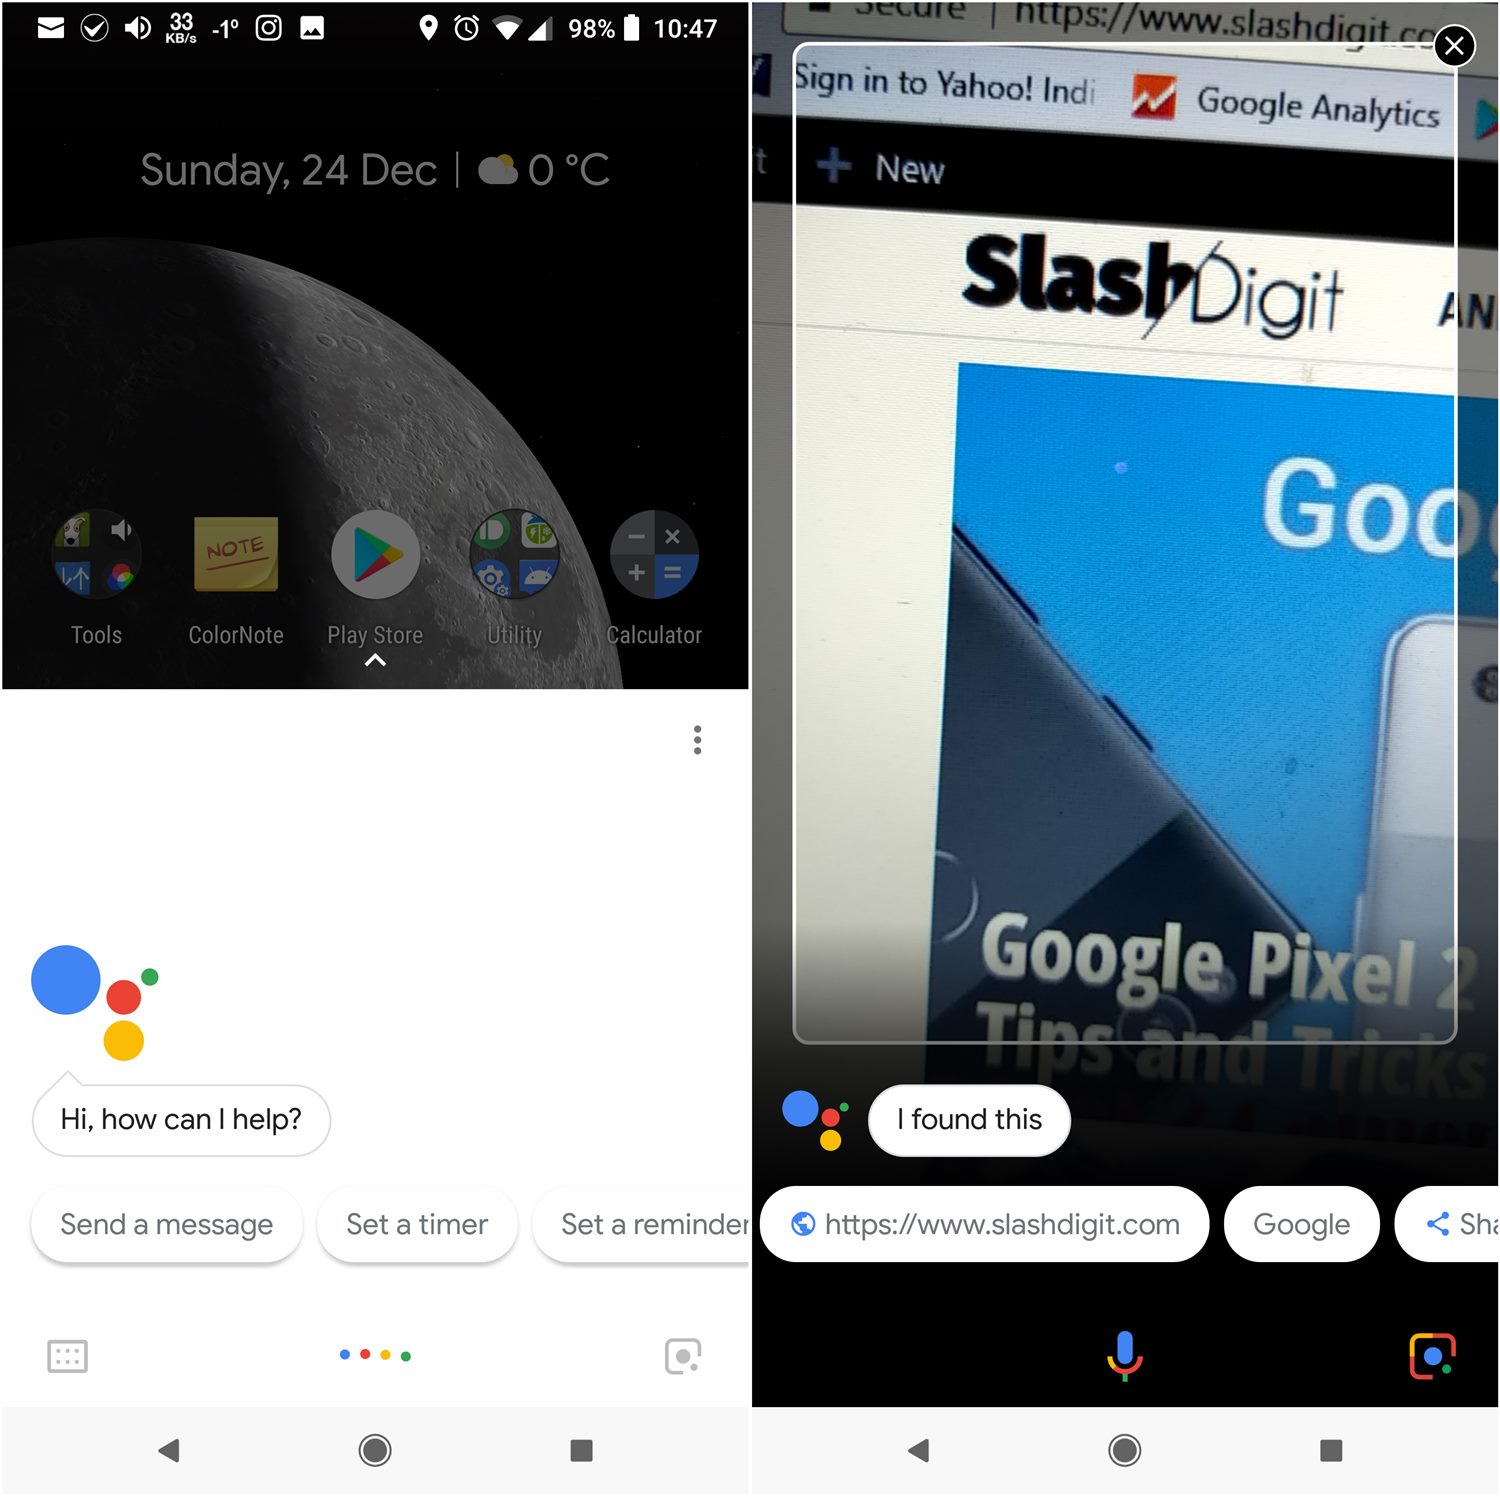 open-webpages-quickly-pc-android-device-using-google-lens